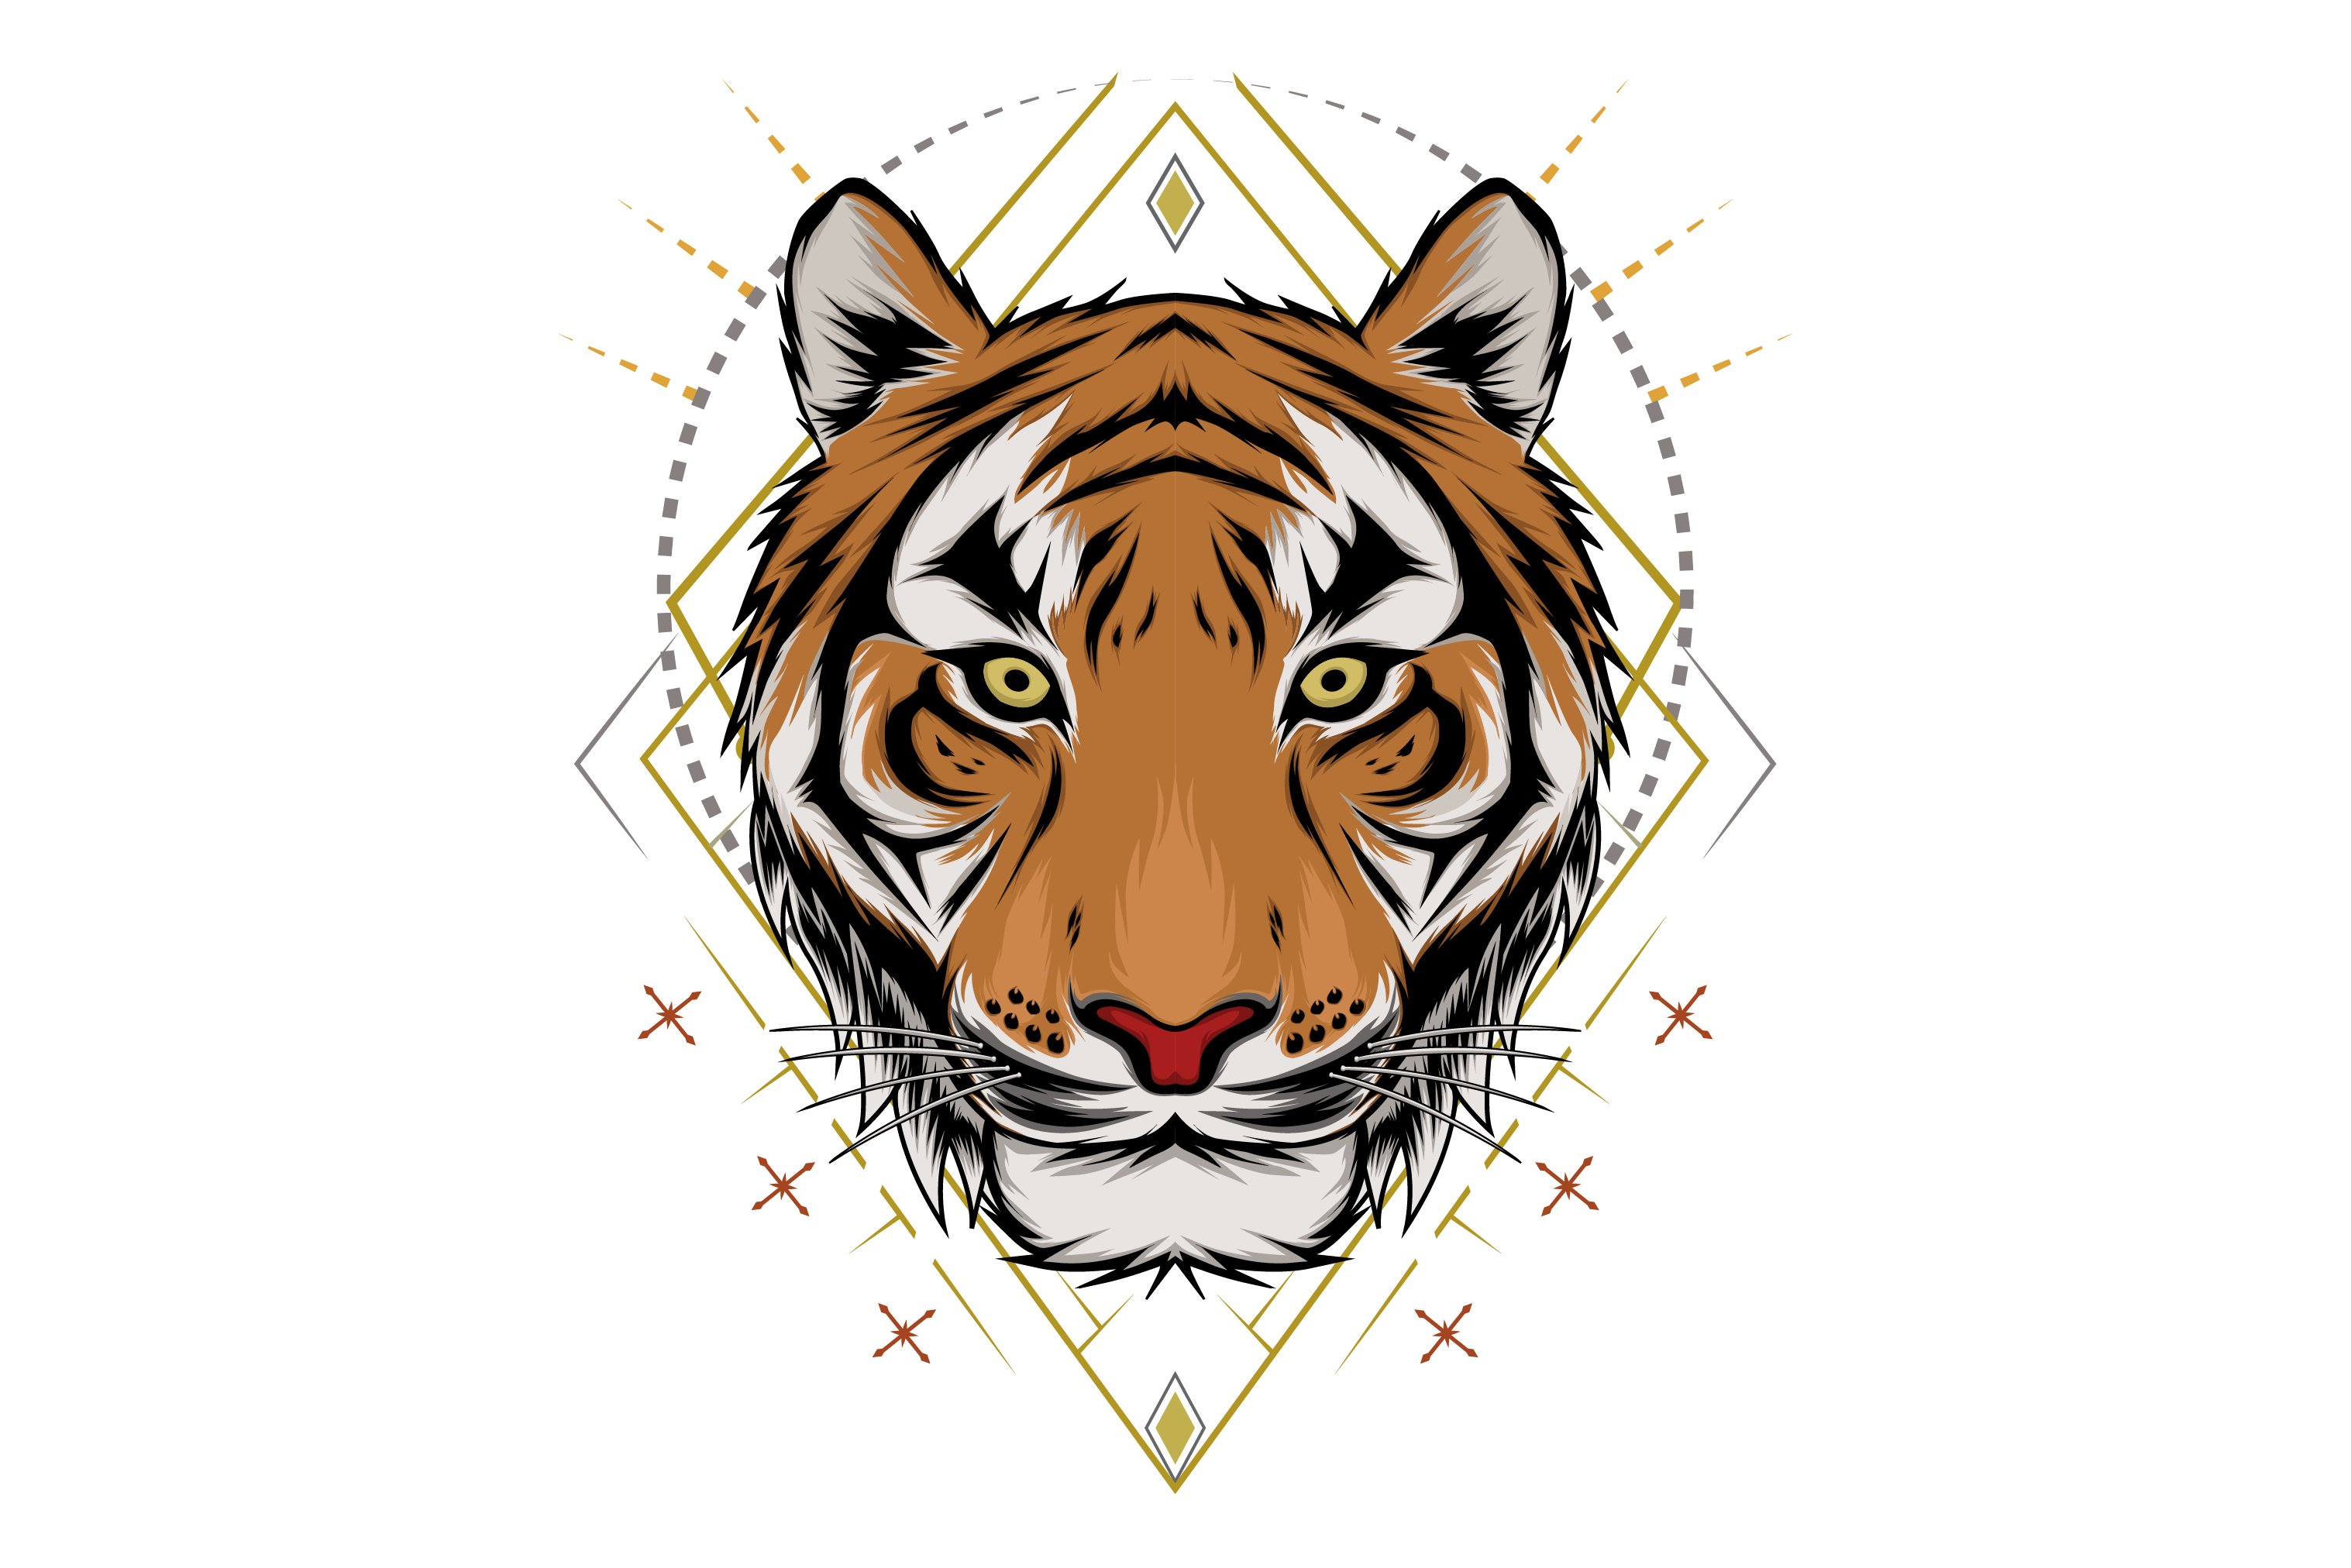 Illustration of a Tiger Head preview image.